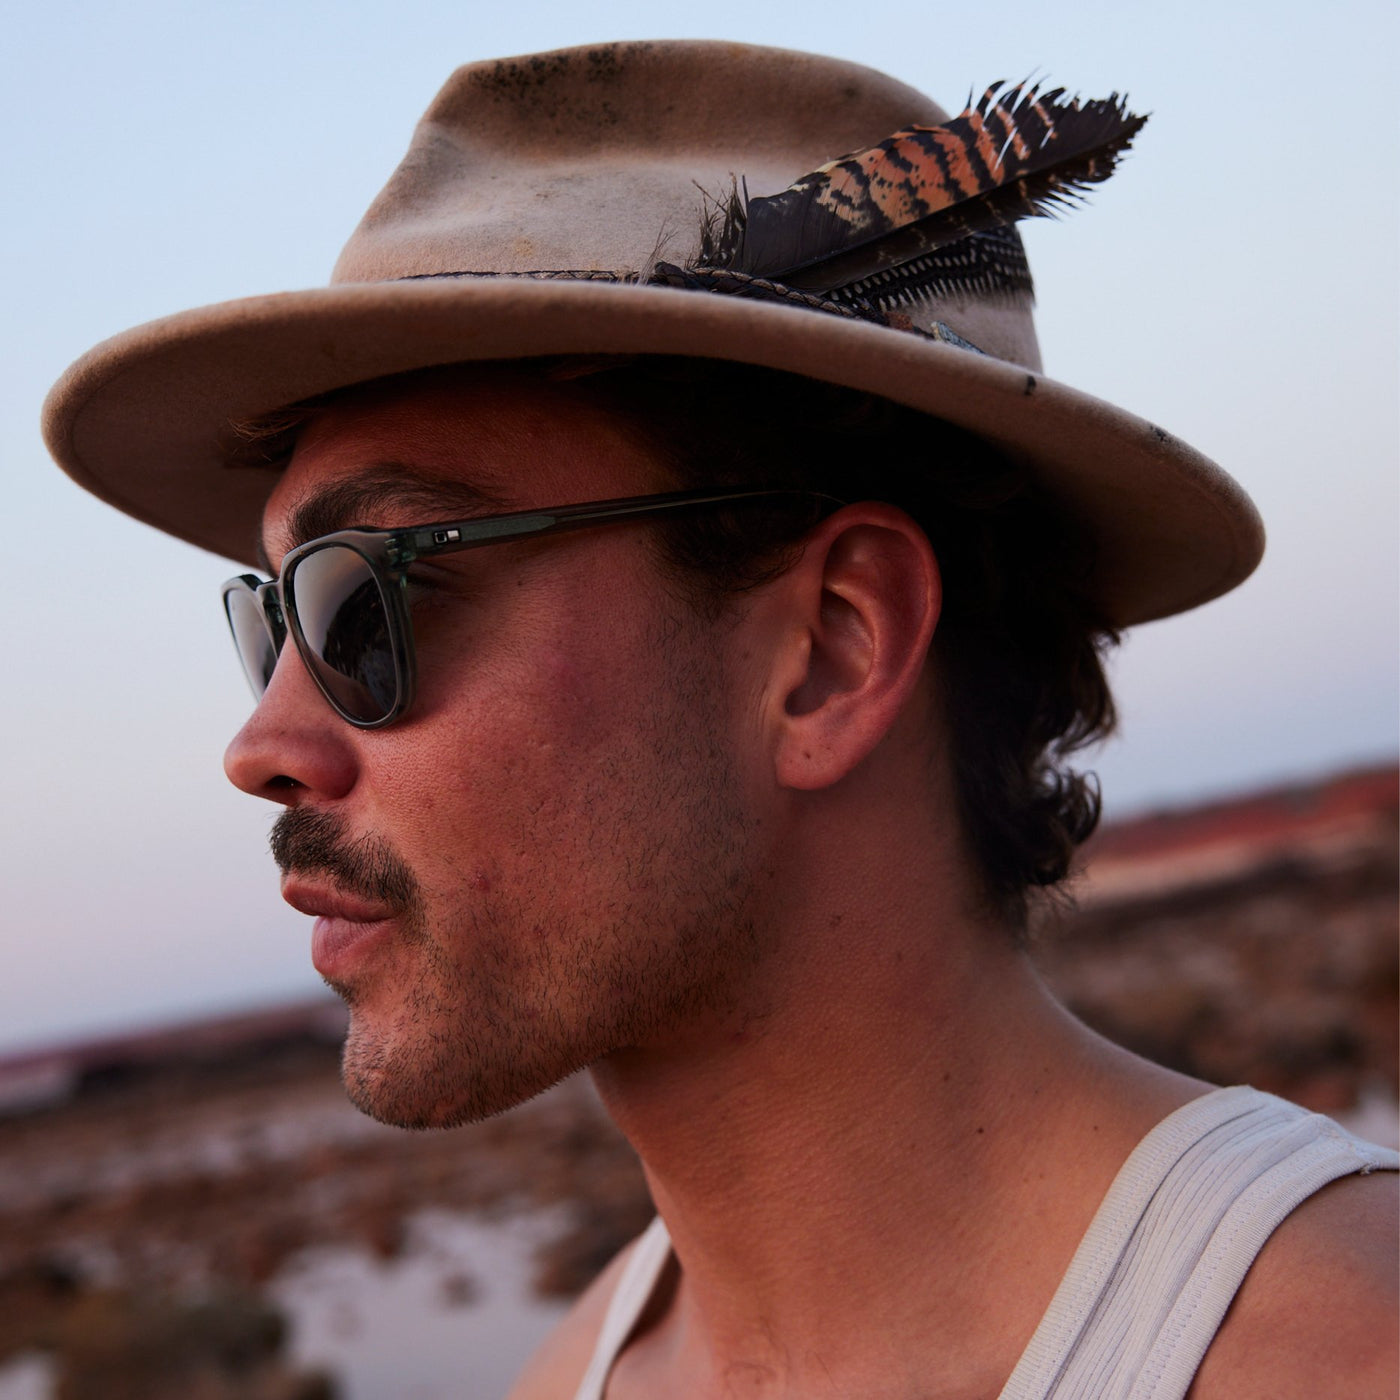 Man wearing Akubra hat with a feather in it and blue sunglasses looking out to the distance